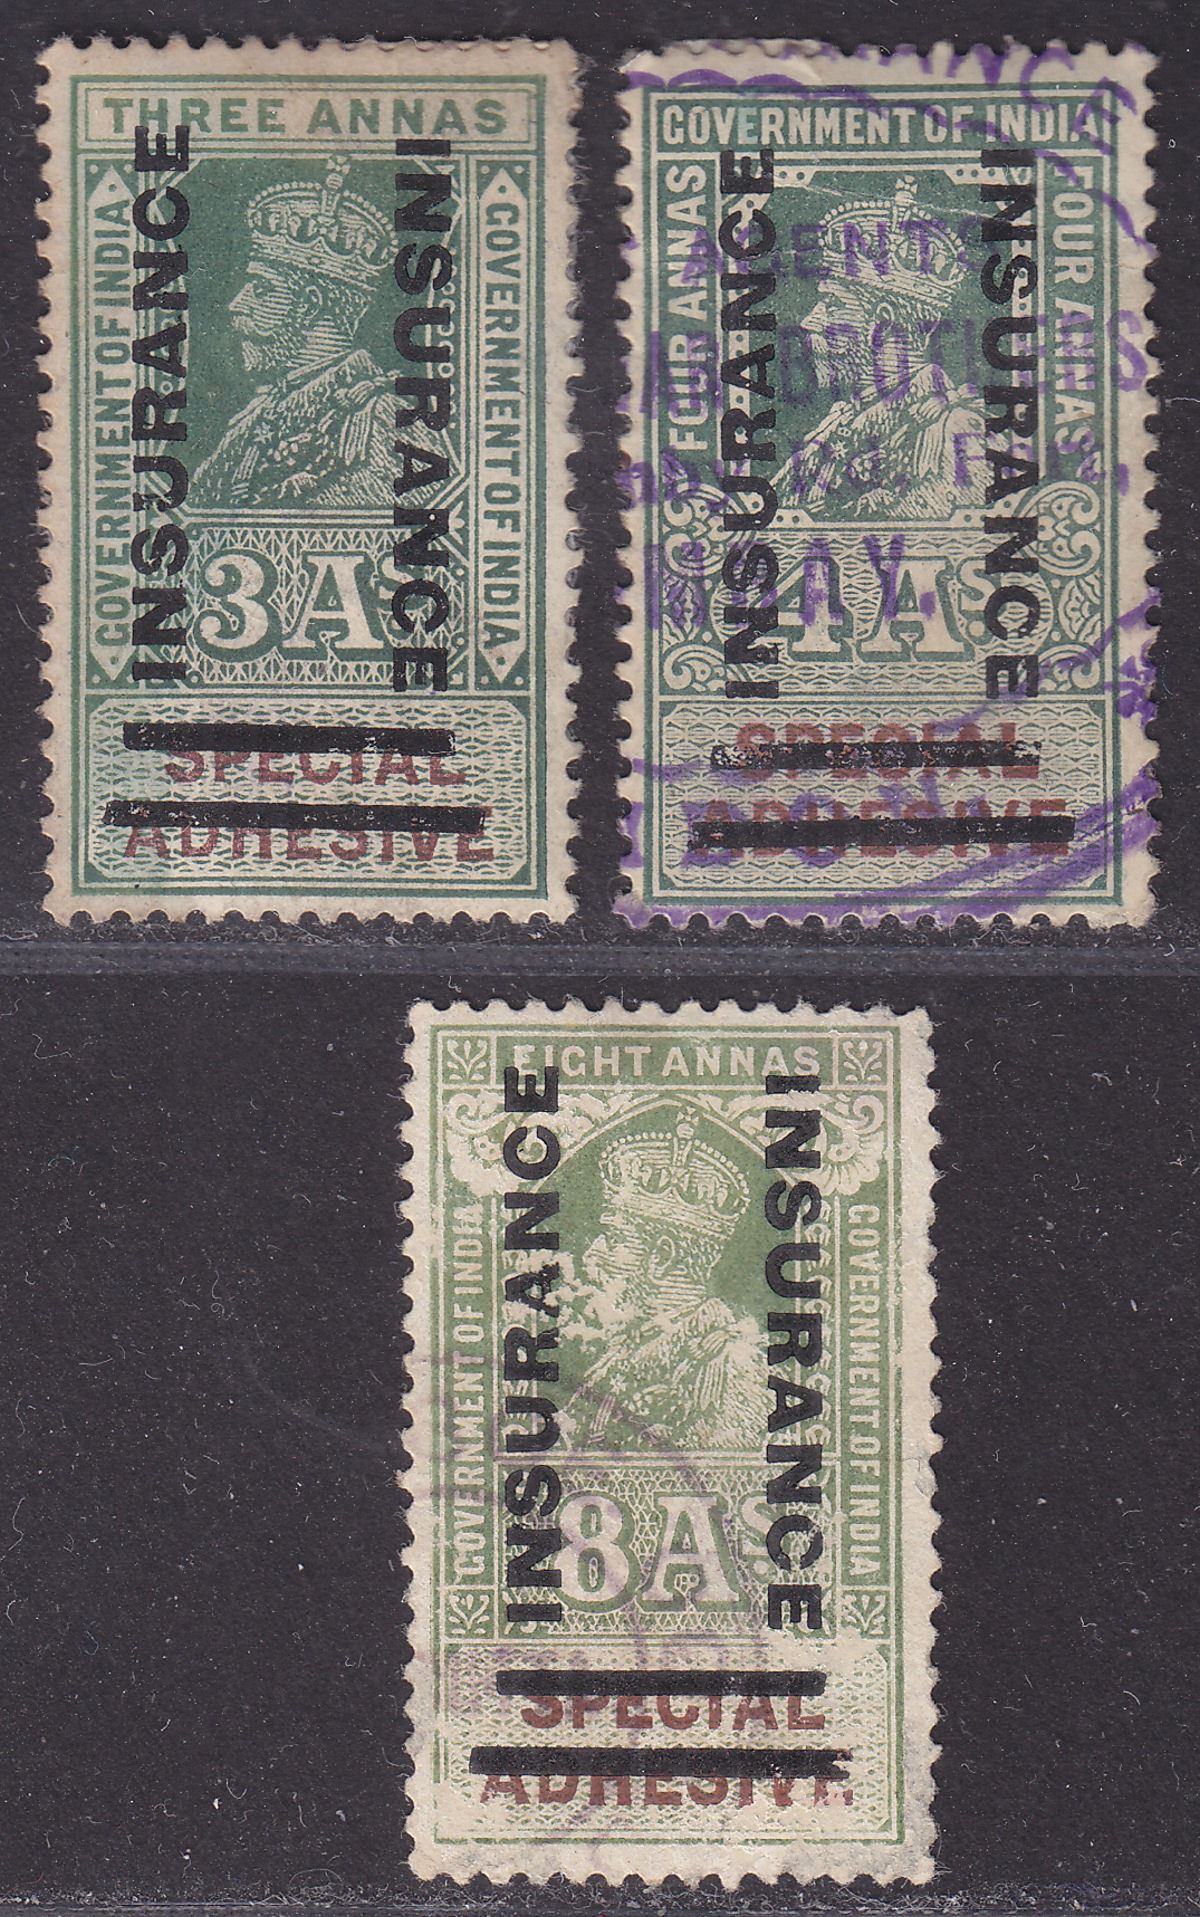 India 1921 Revenue Insurance Overprint on Special Adhesives 3a 4a 8a Used BF2-5